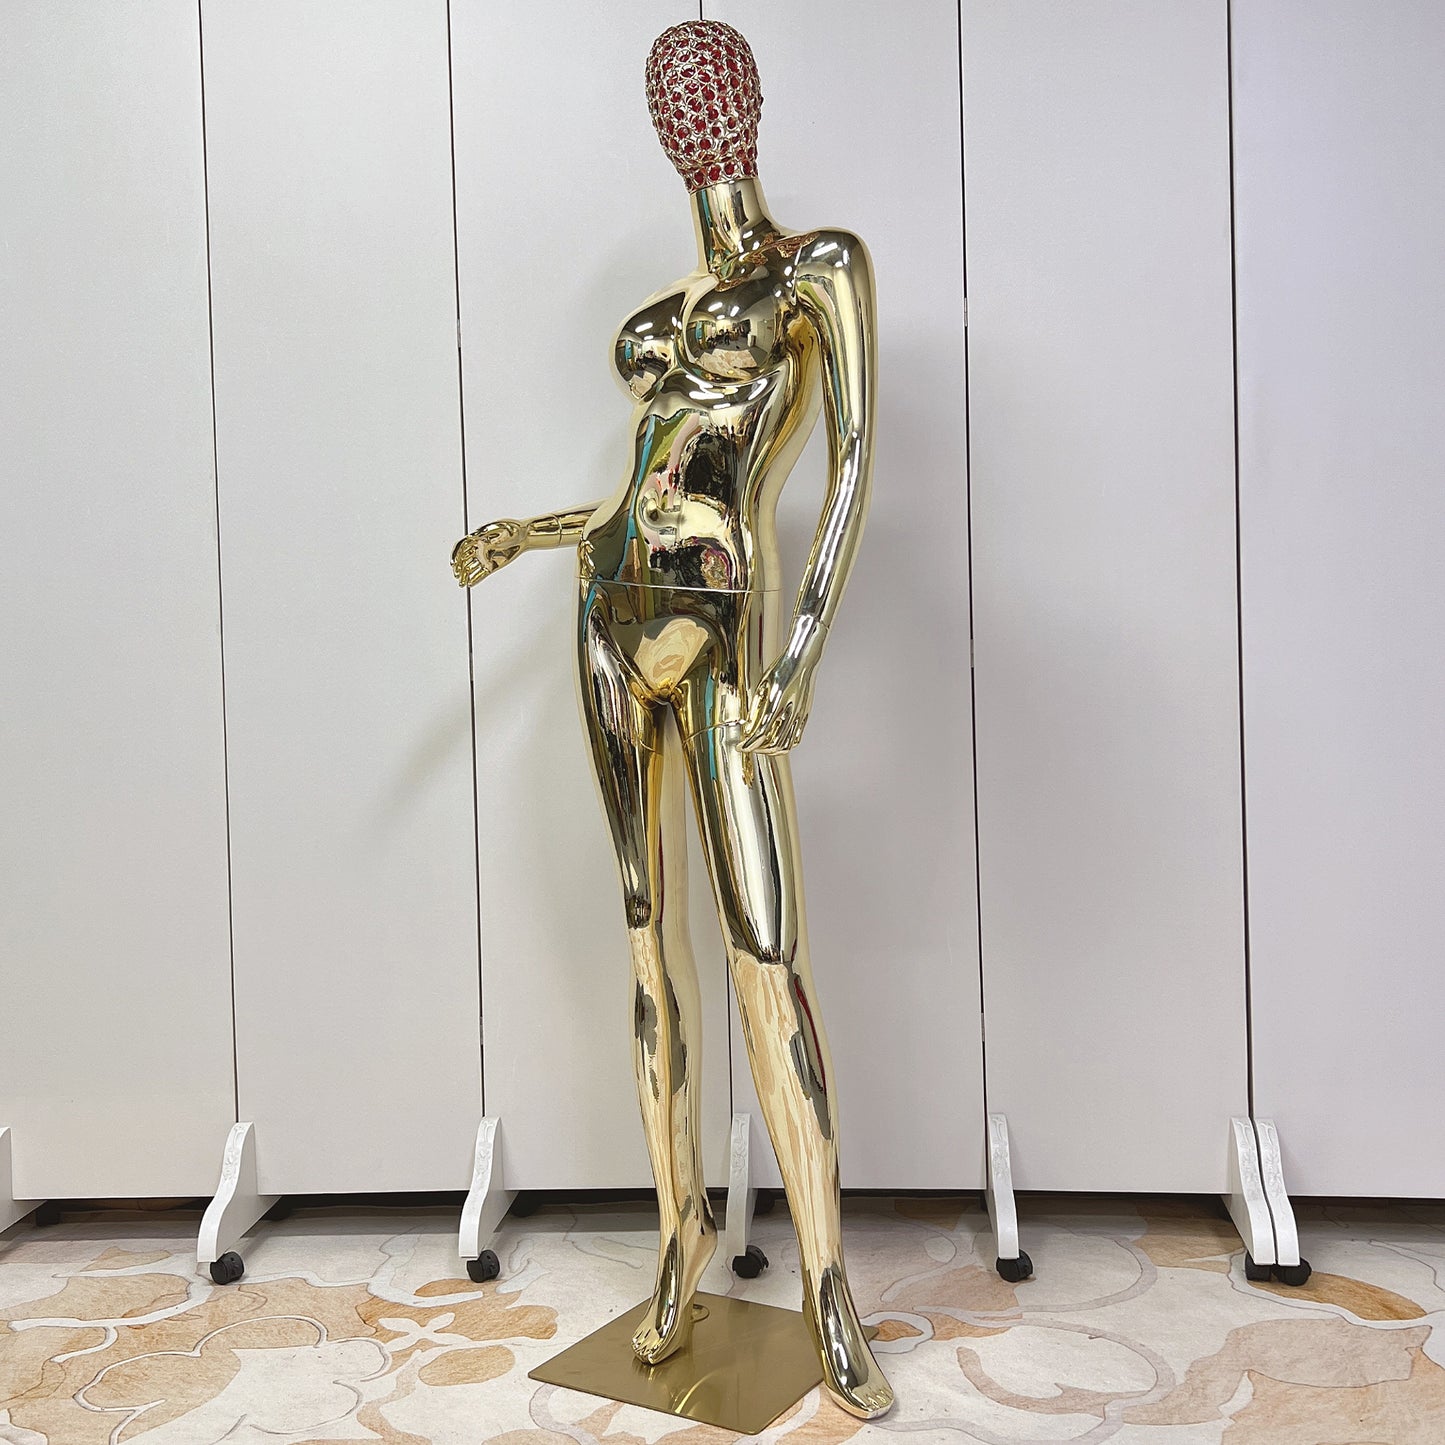 Jelimate Luxury Plated Gold Adult Female Mannequin Full Body Dress Form,Women Dress Form With Wire Mesh Head,Wedding Dress Mannequin Clothing Display Model